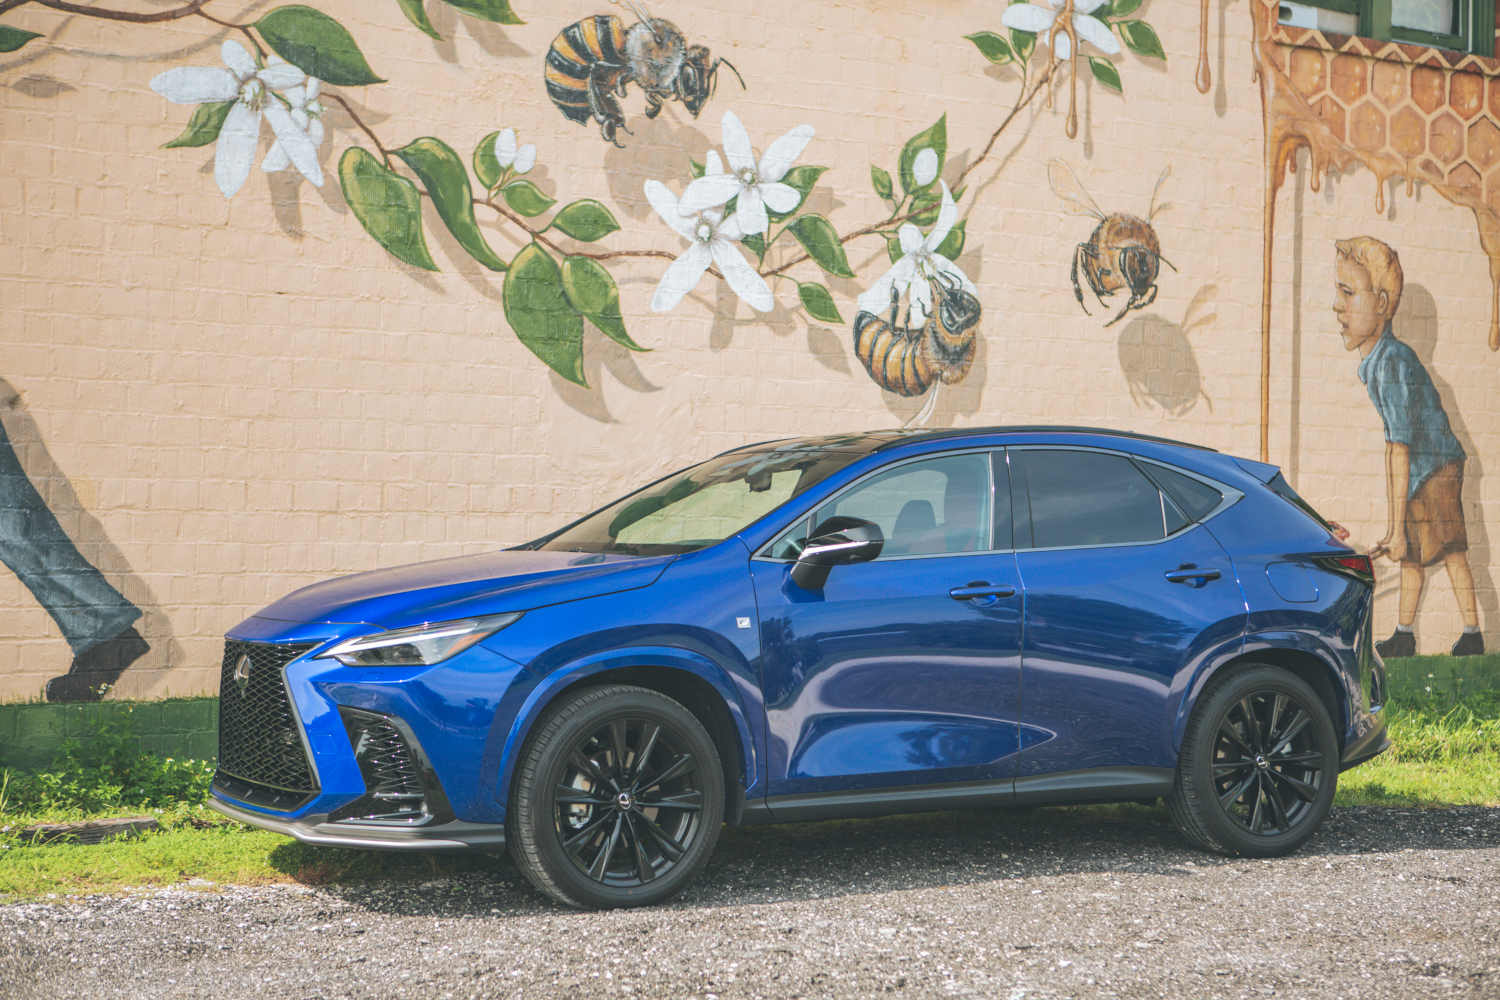 This 2023 Lexus SUV is the NX